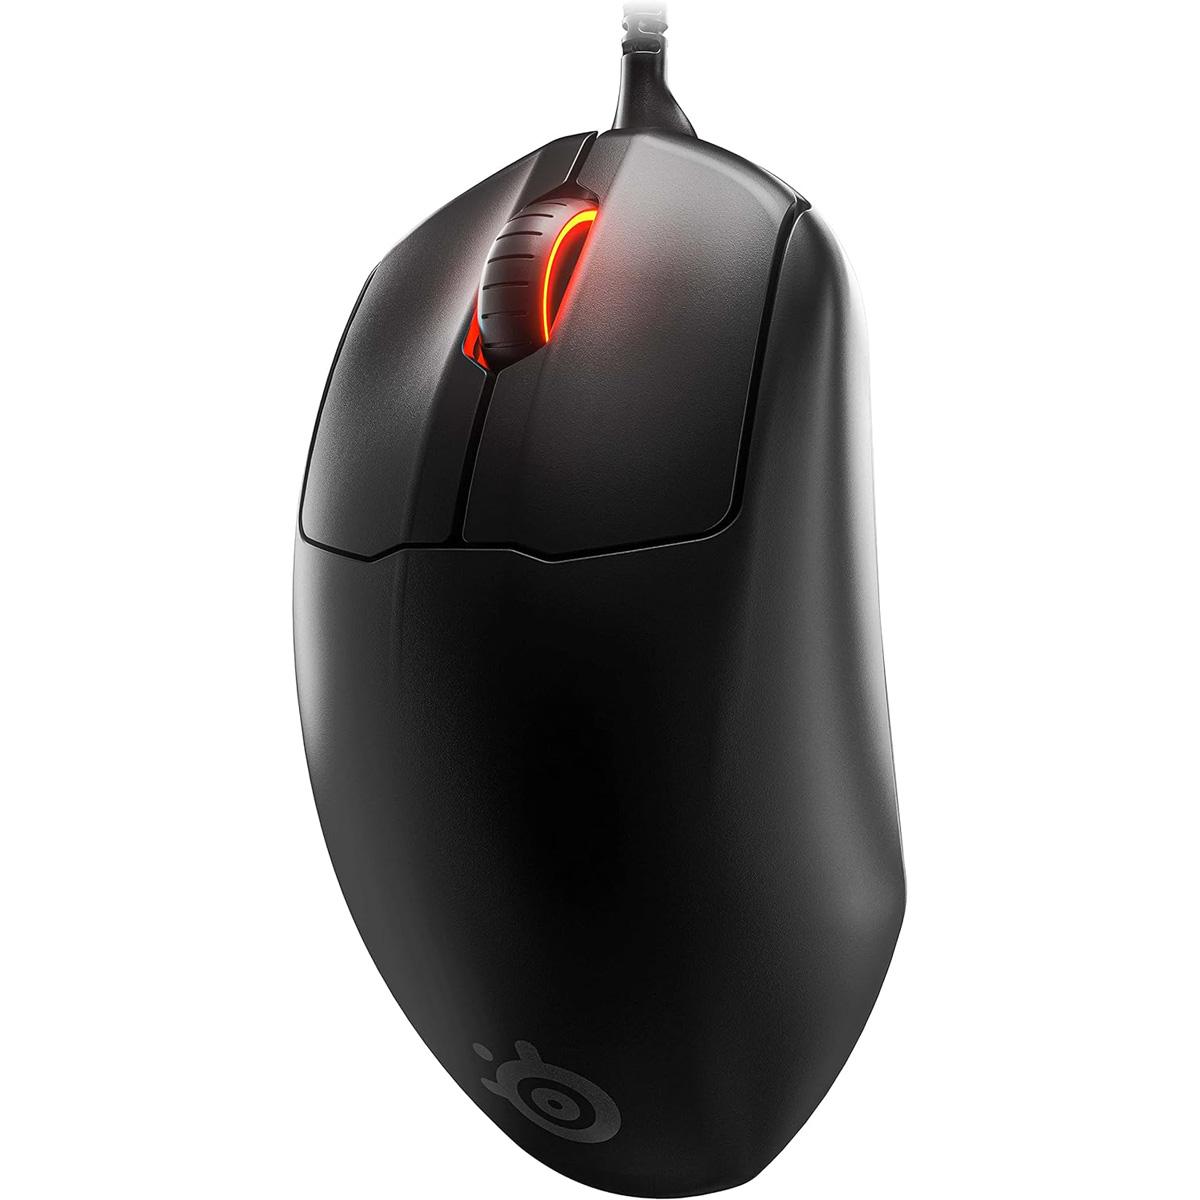 SteelSeries Esports FPS Gaming Mouse for $22.95